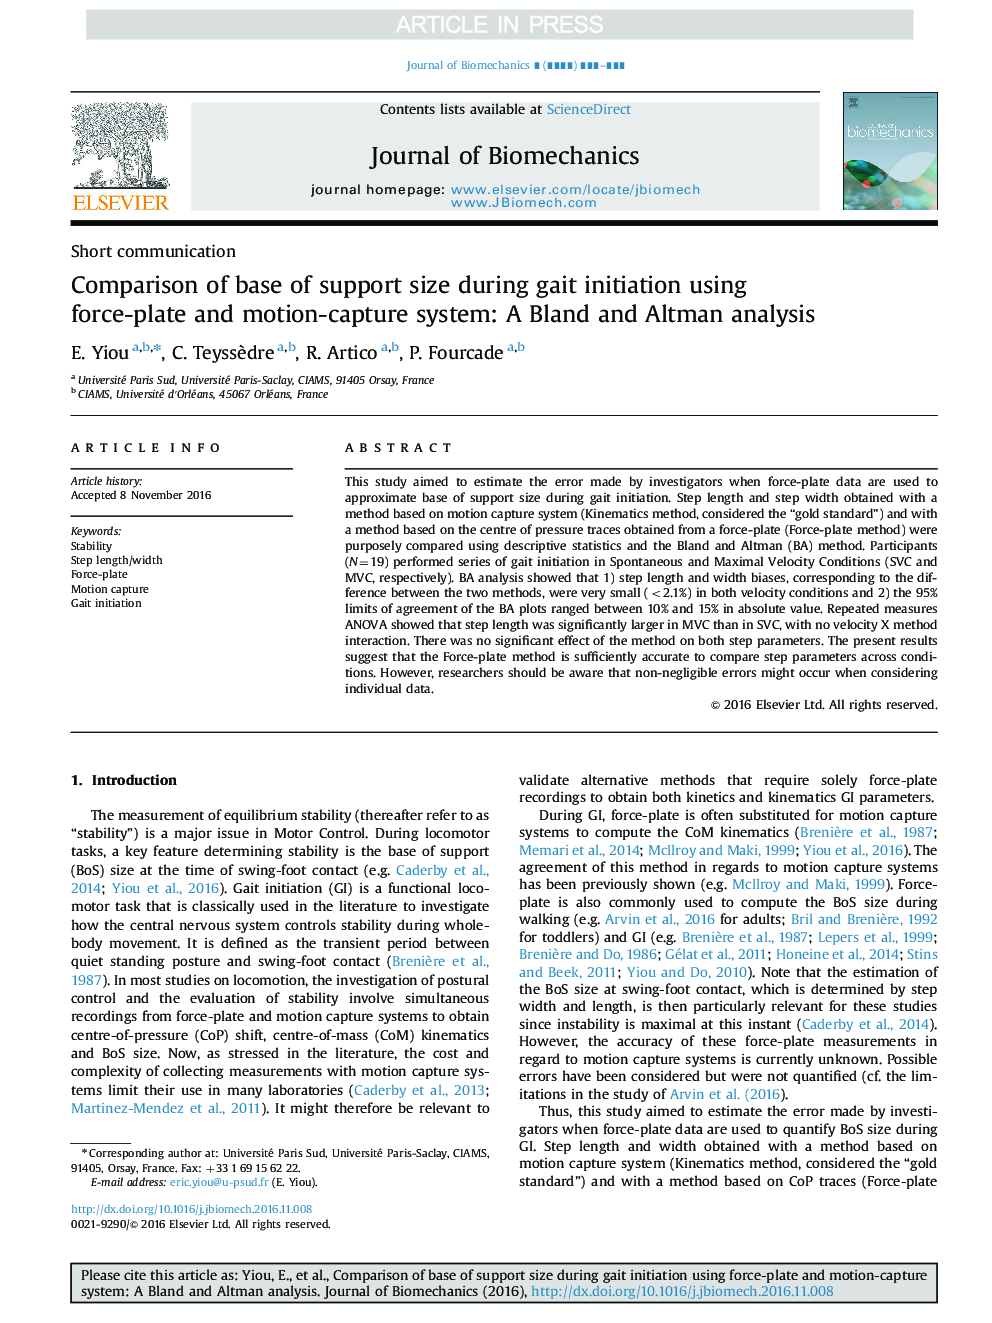 Comparison of base of support size during gait initiation using force-plate and motion-capture system: A Bland and Altman analysis